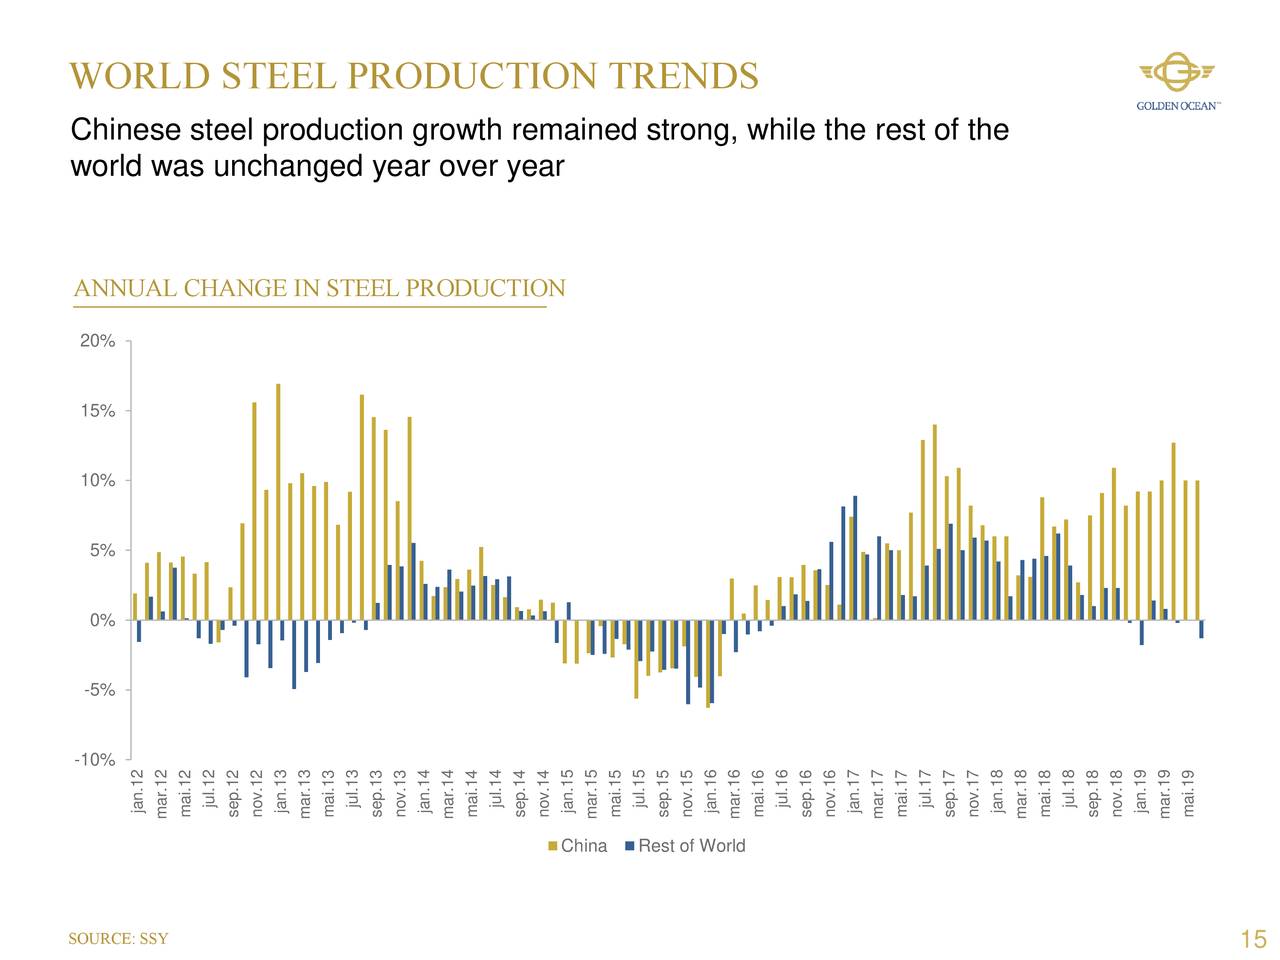 WORLD STEEL PRODUCTION TRENDS